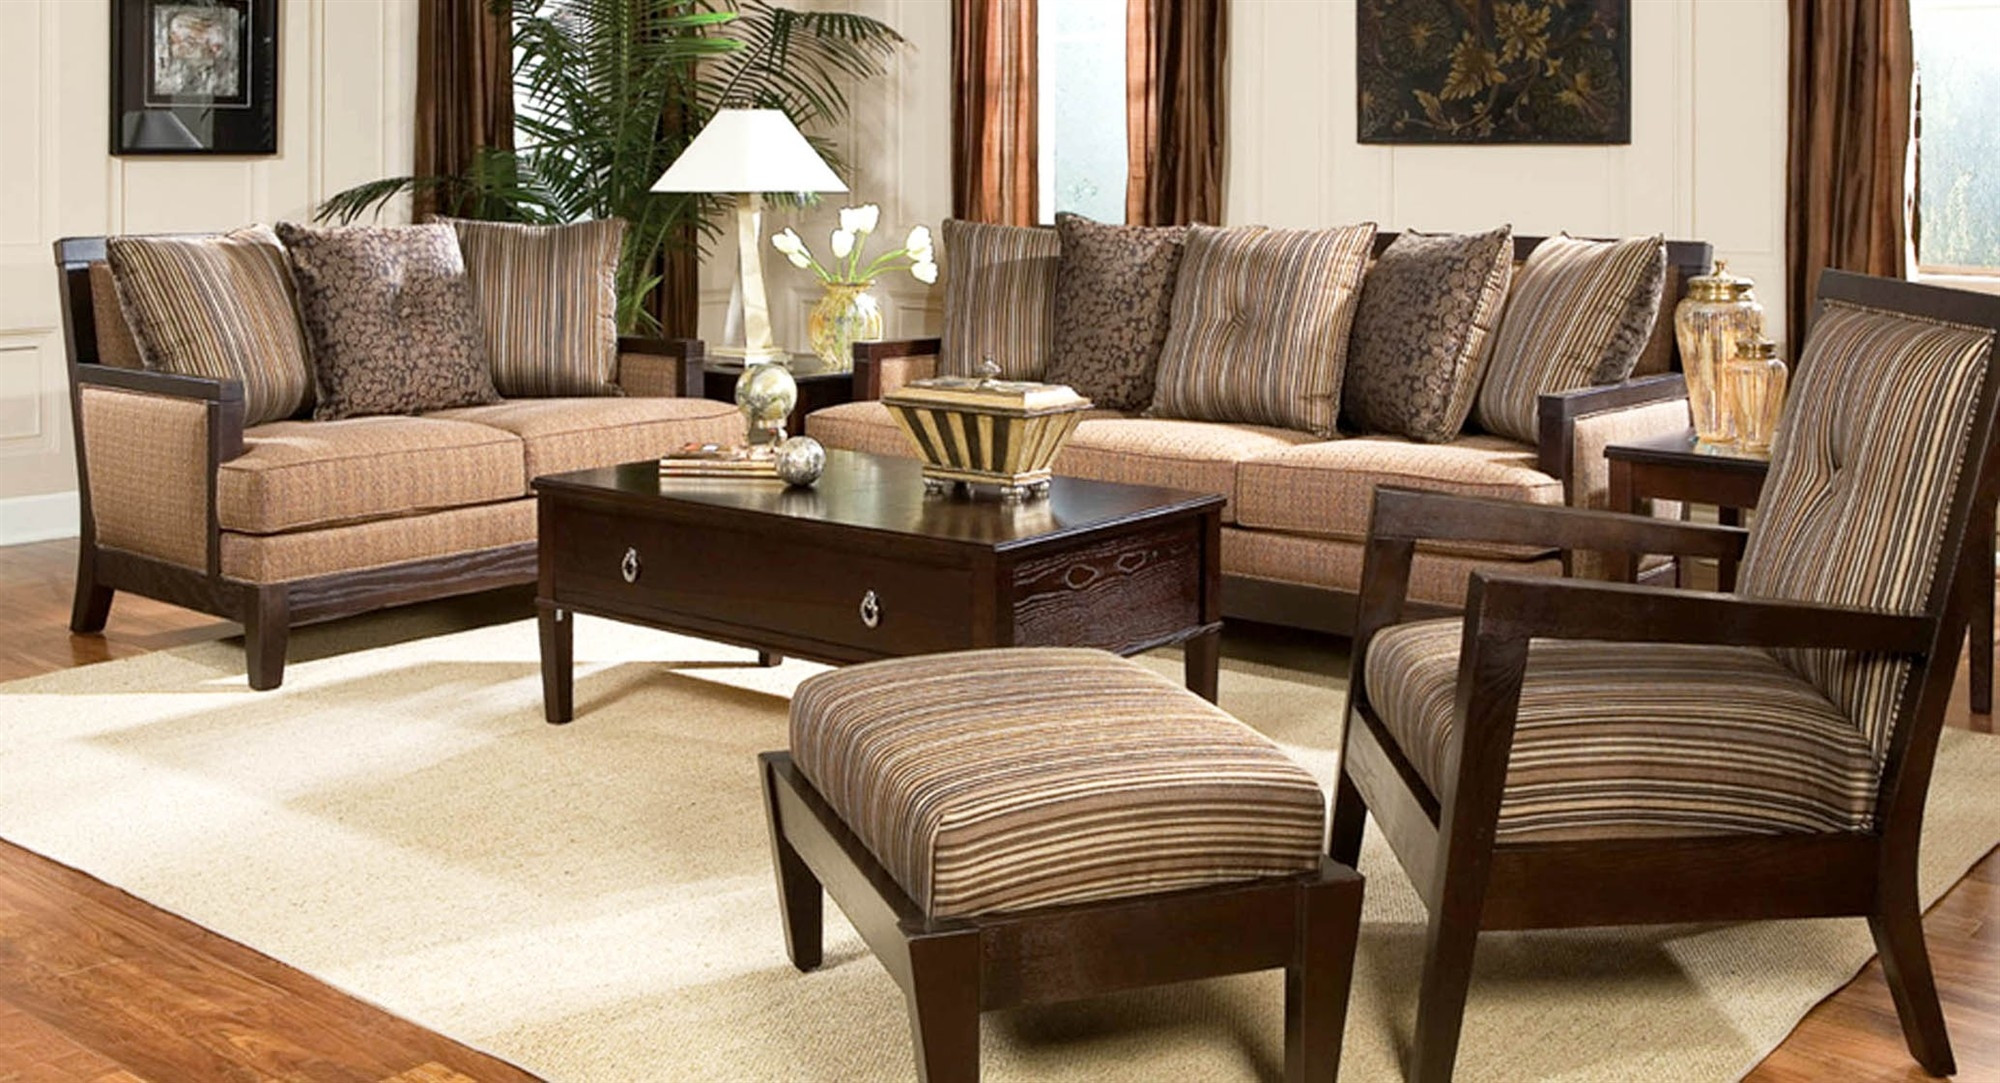 Chairs For Living Room Cheap
 15 s Striped Sofas and Chairs